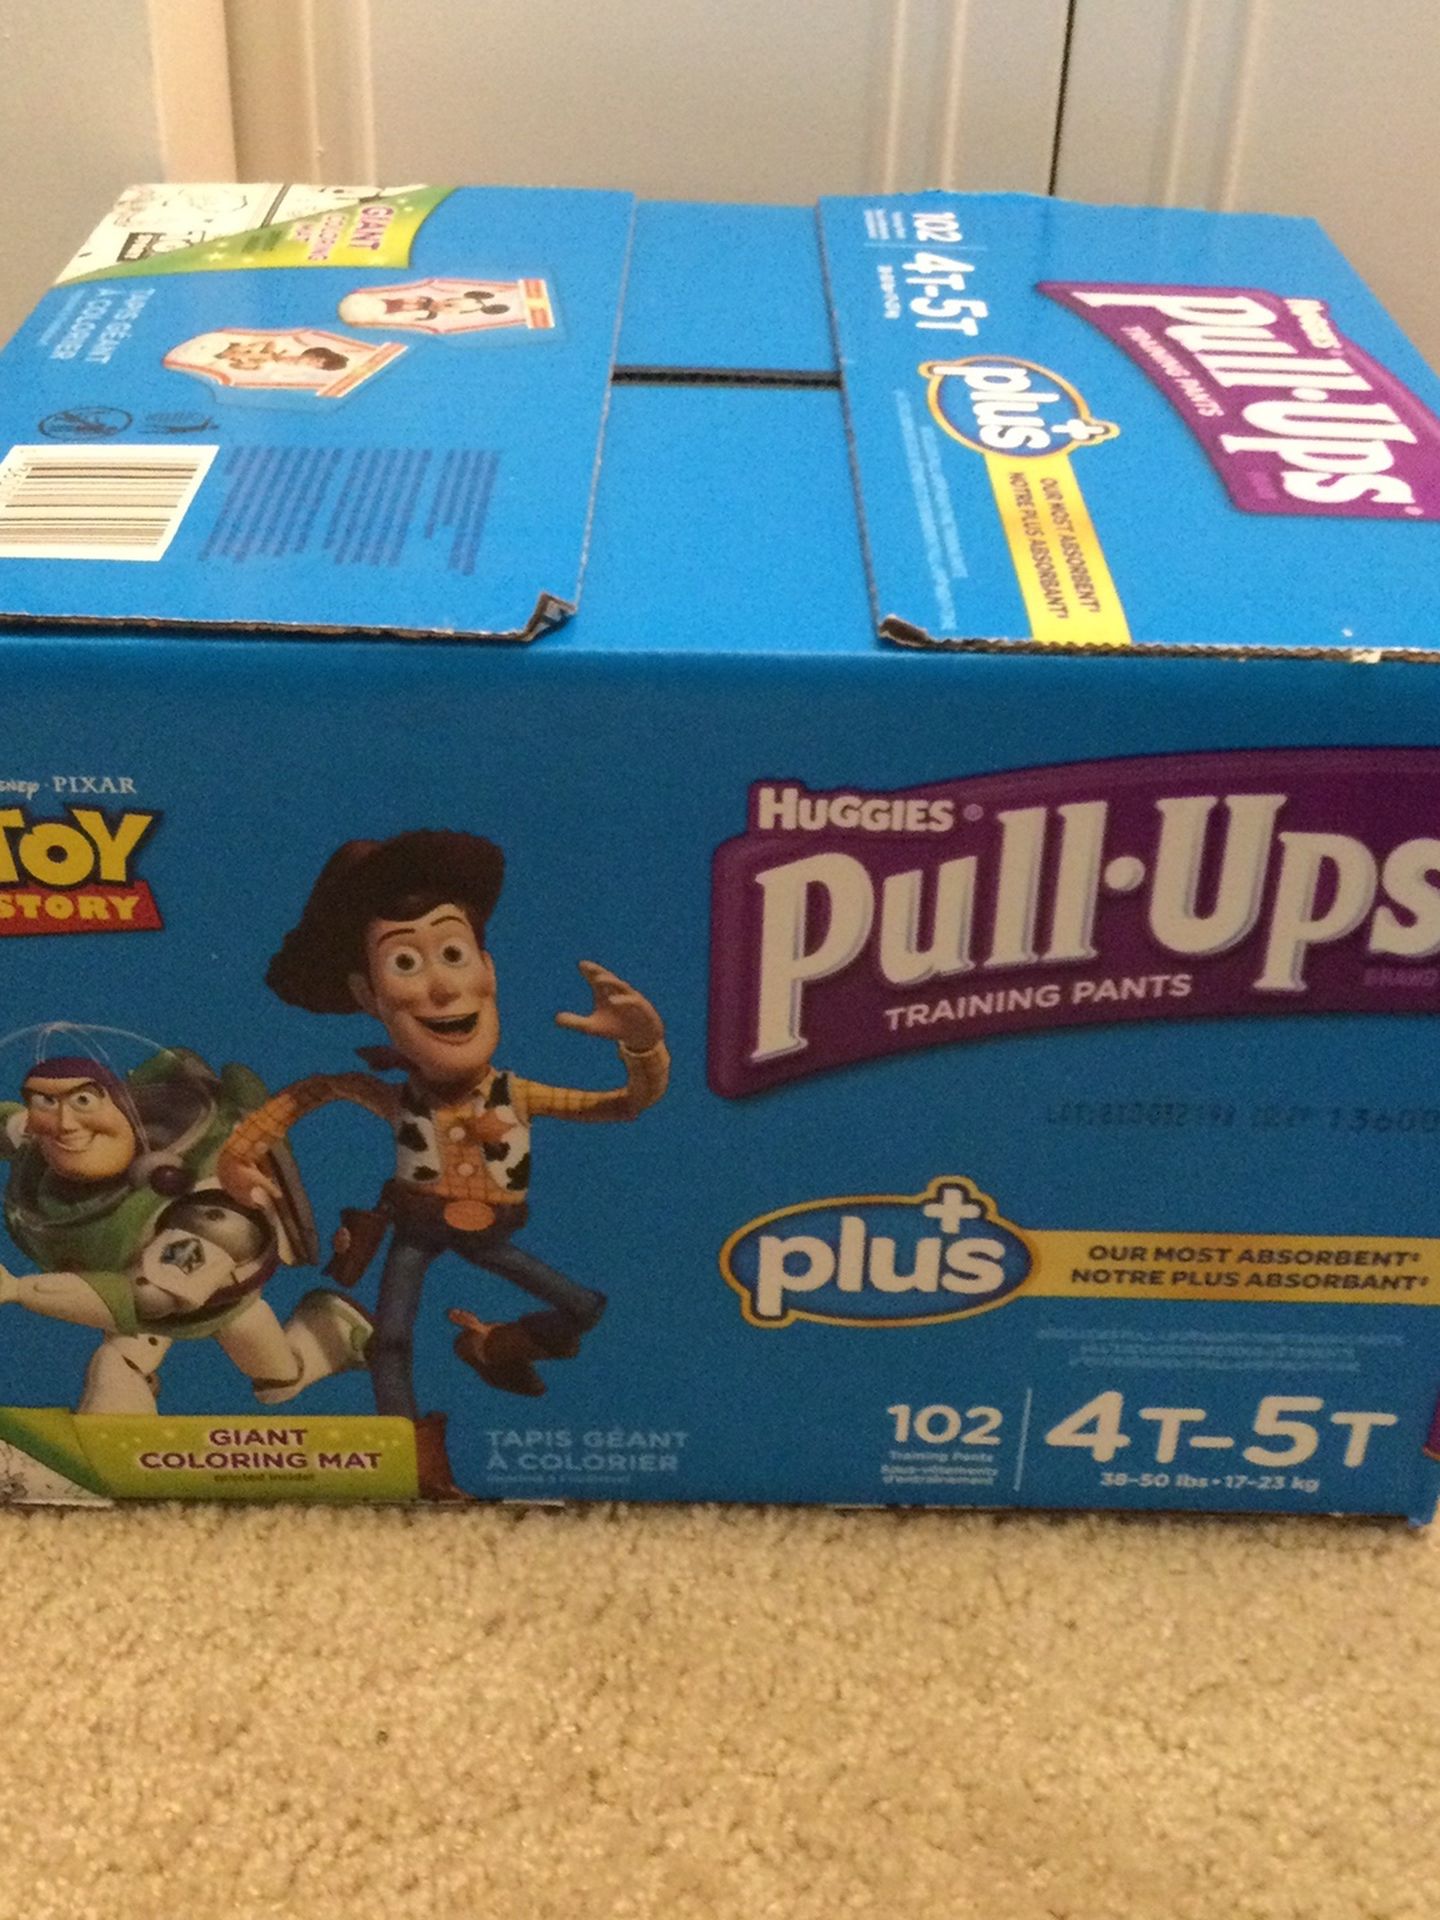 4T-5T Boys Pull Ups Brand New Sealed Box 102 Count